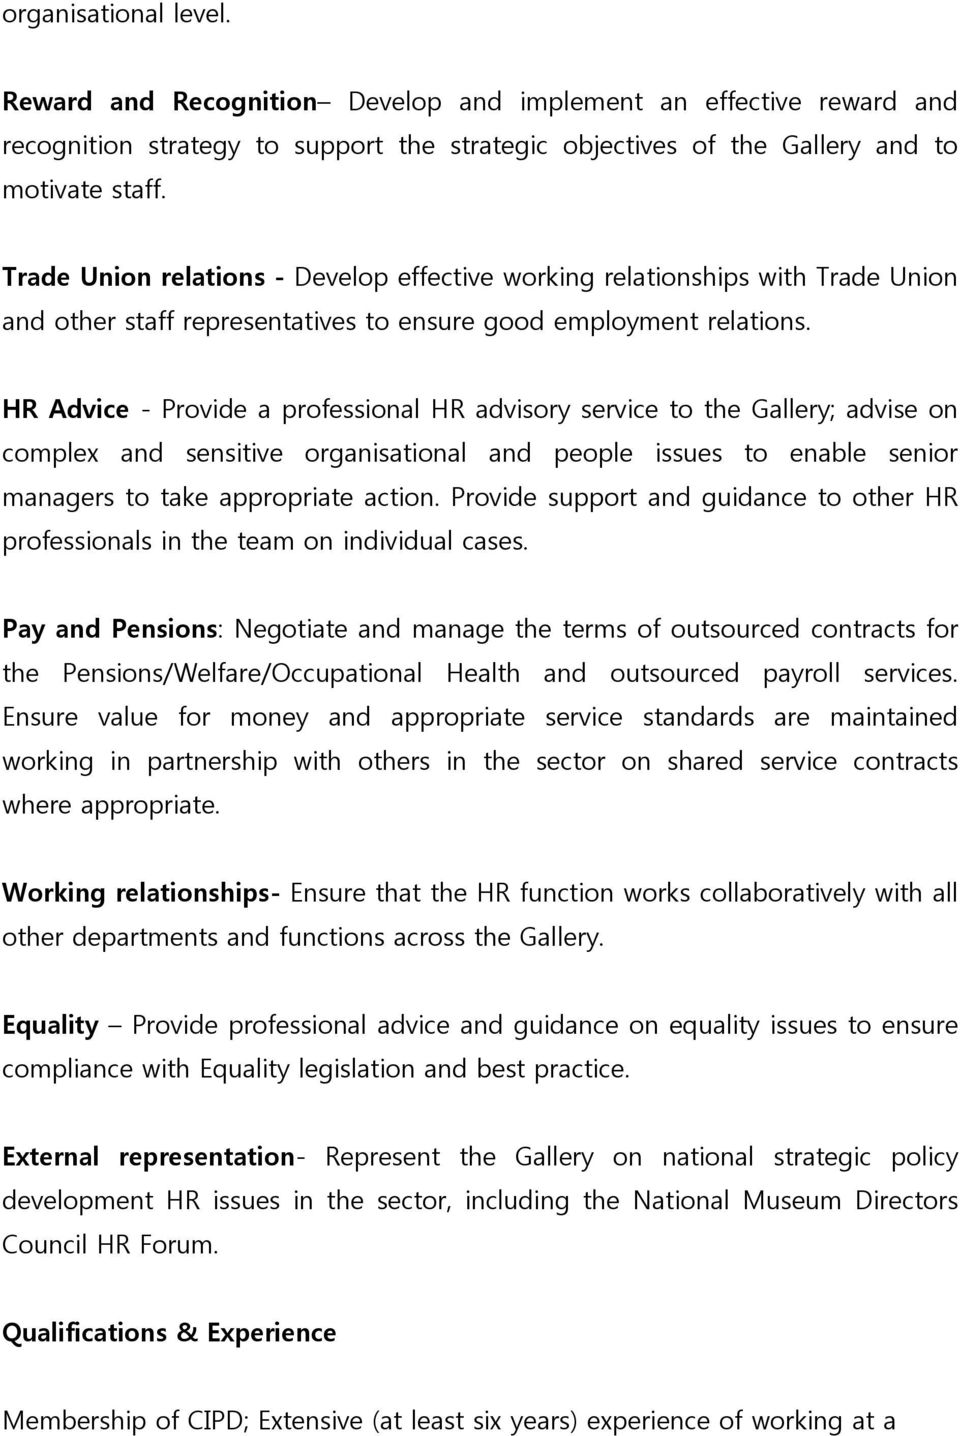 HR Advice - Provide a professional HR advisory service to the Gallery; advise on complex and sensitive organisational and people issues to enable senior managers to take appropriate action.